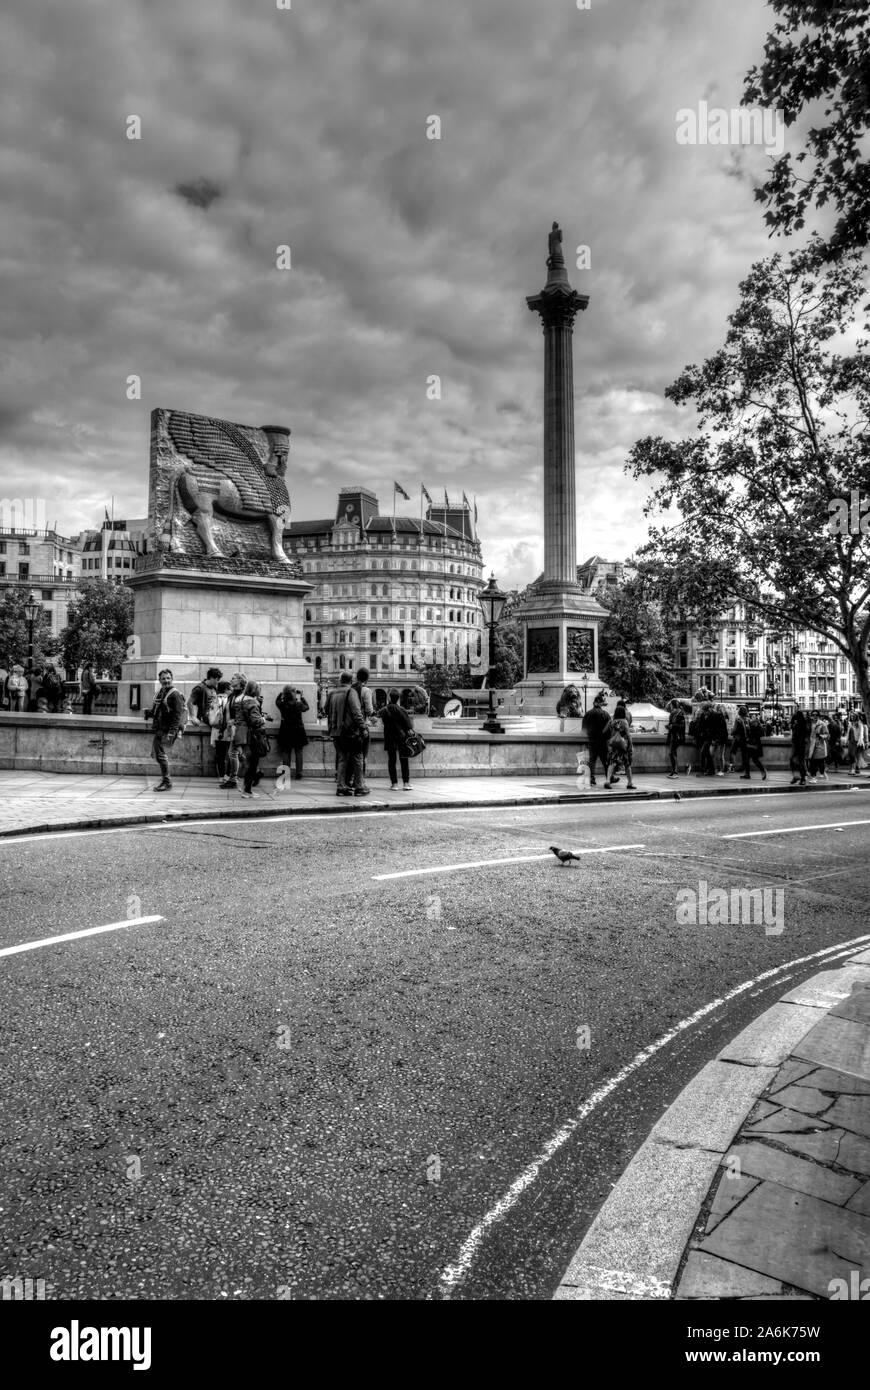 London, United Kingdom - September 7, 2019: View of numerous tourists walking some motion blurred within Trafalgar Square with Nelson's Column and Fou Stock Photo